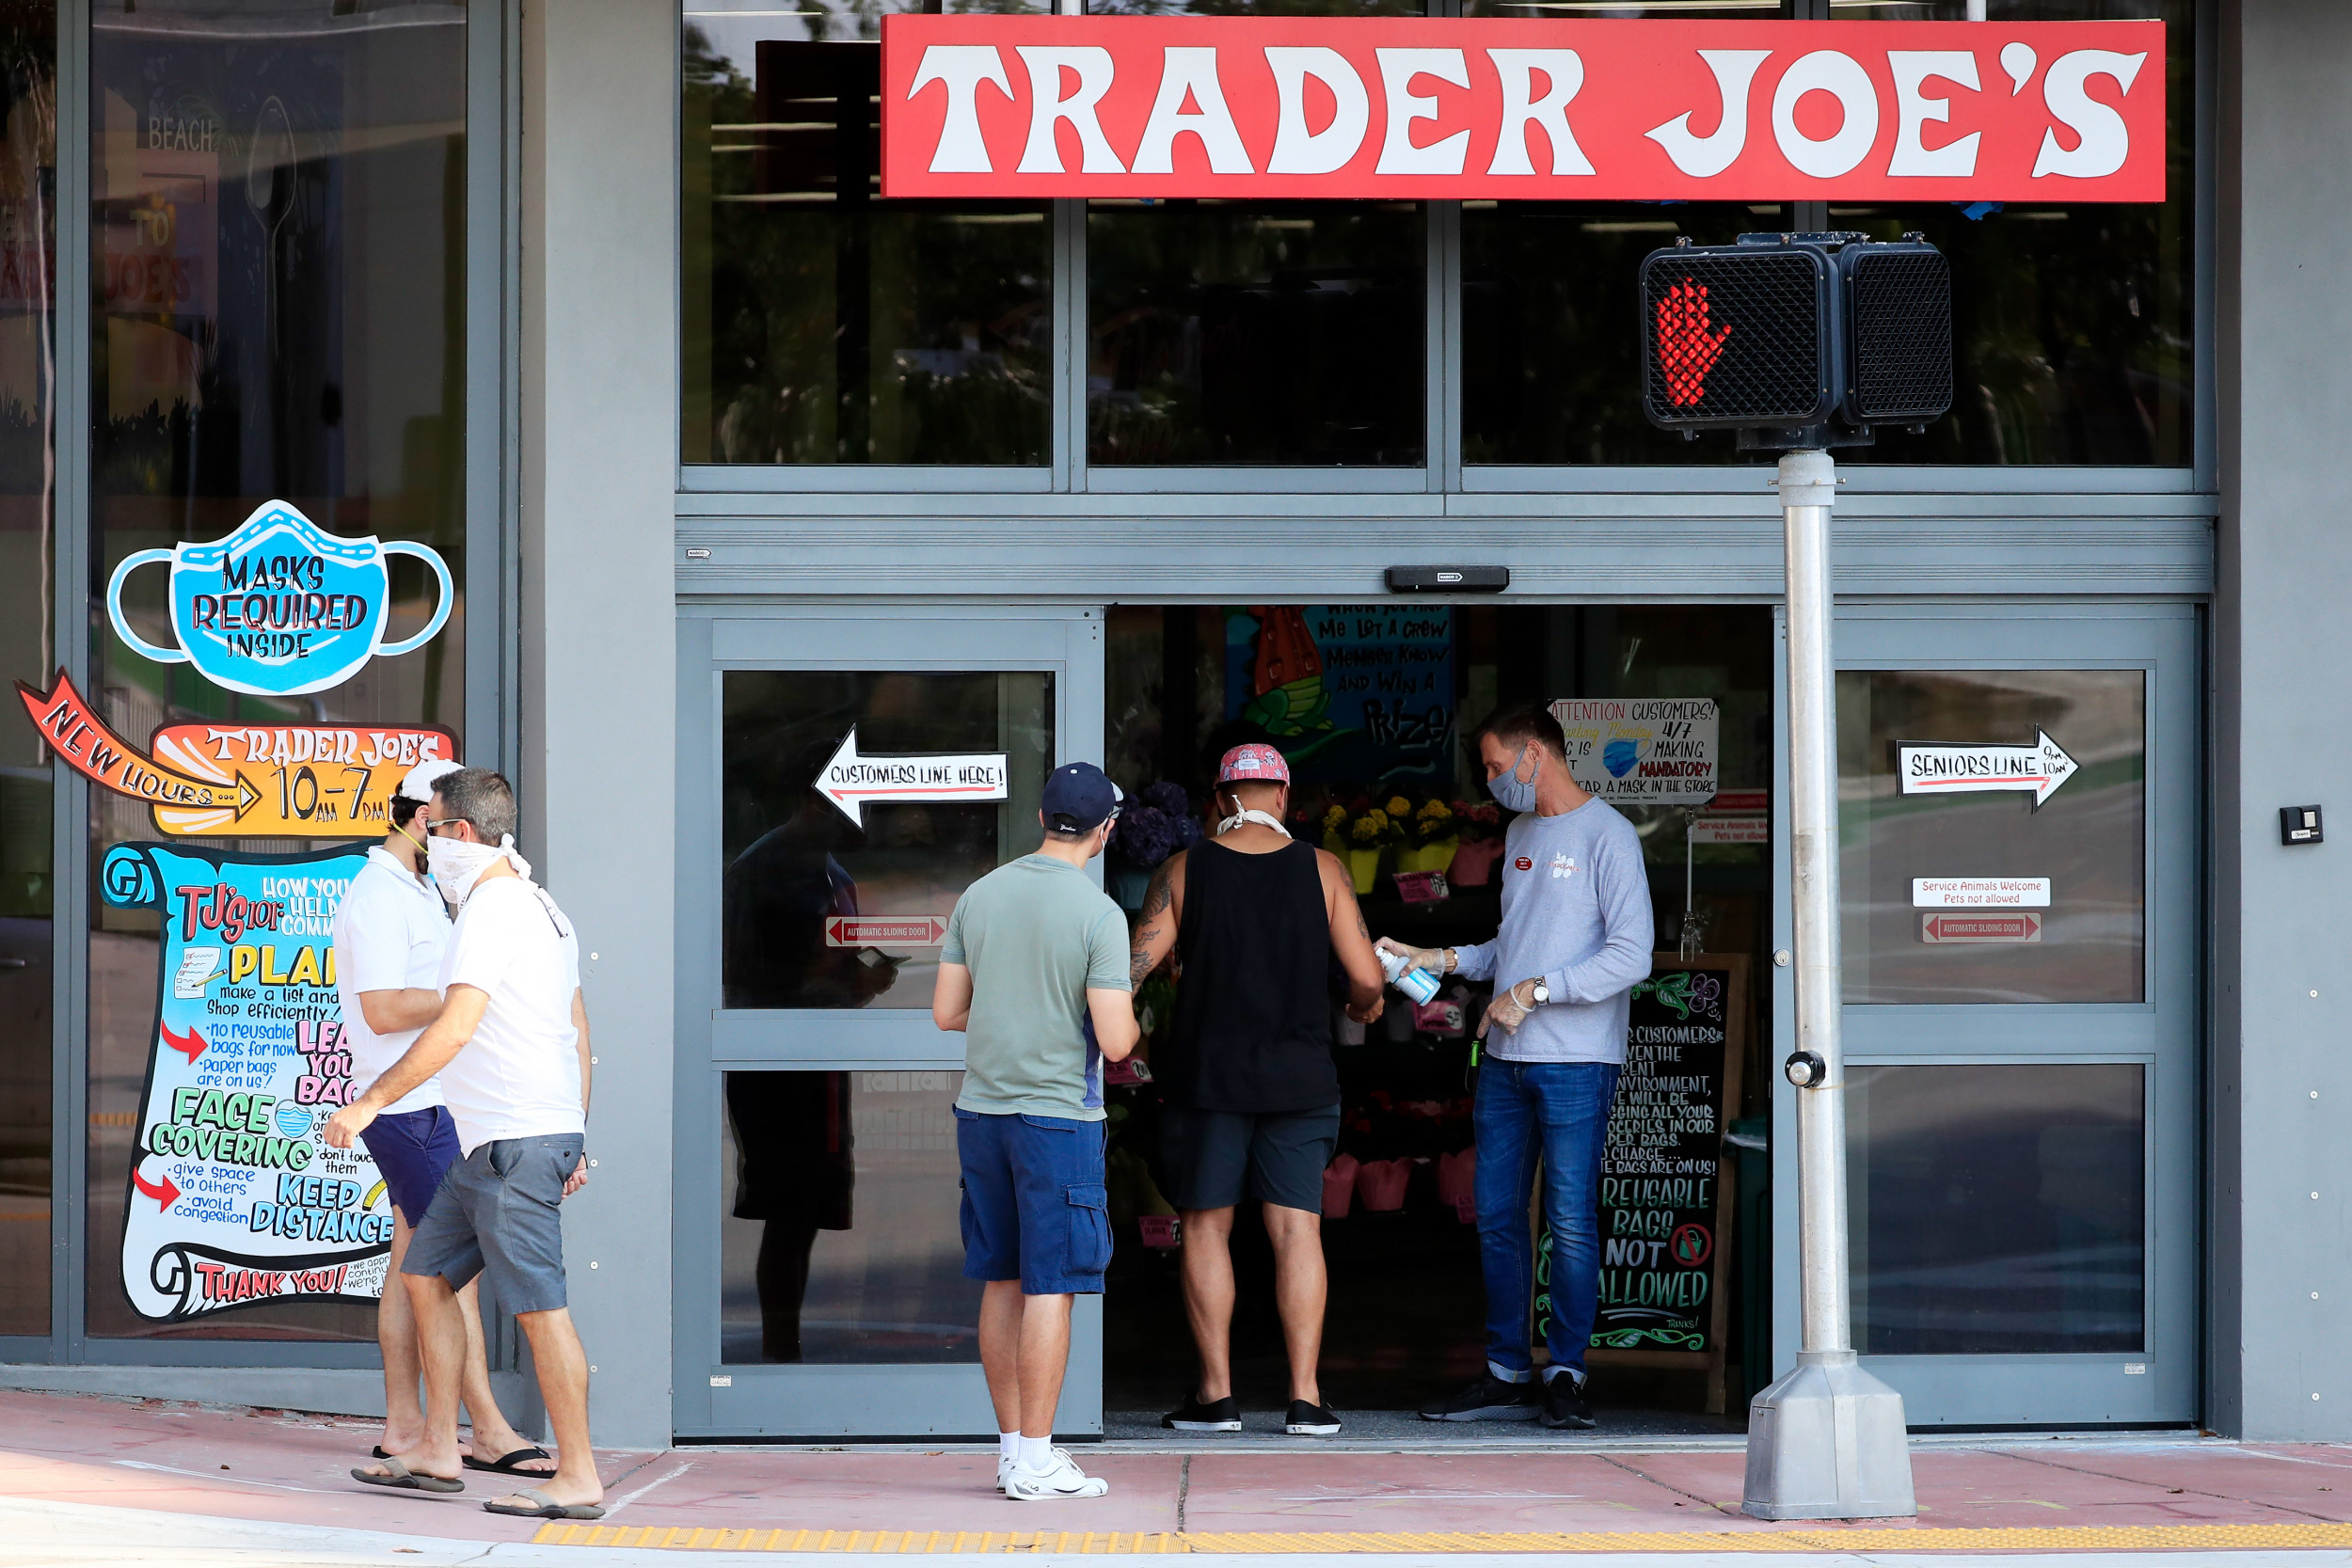 Trader Joe’s manager prevents anti-maskers from entering the watched video store 7 million times